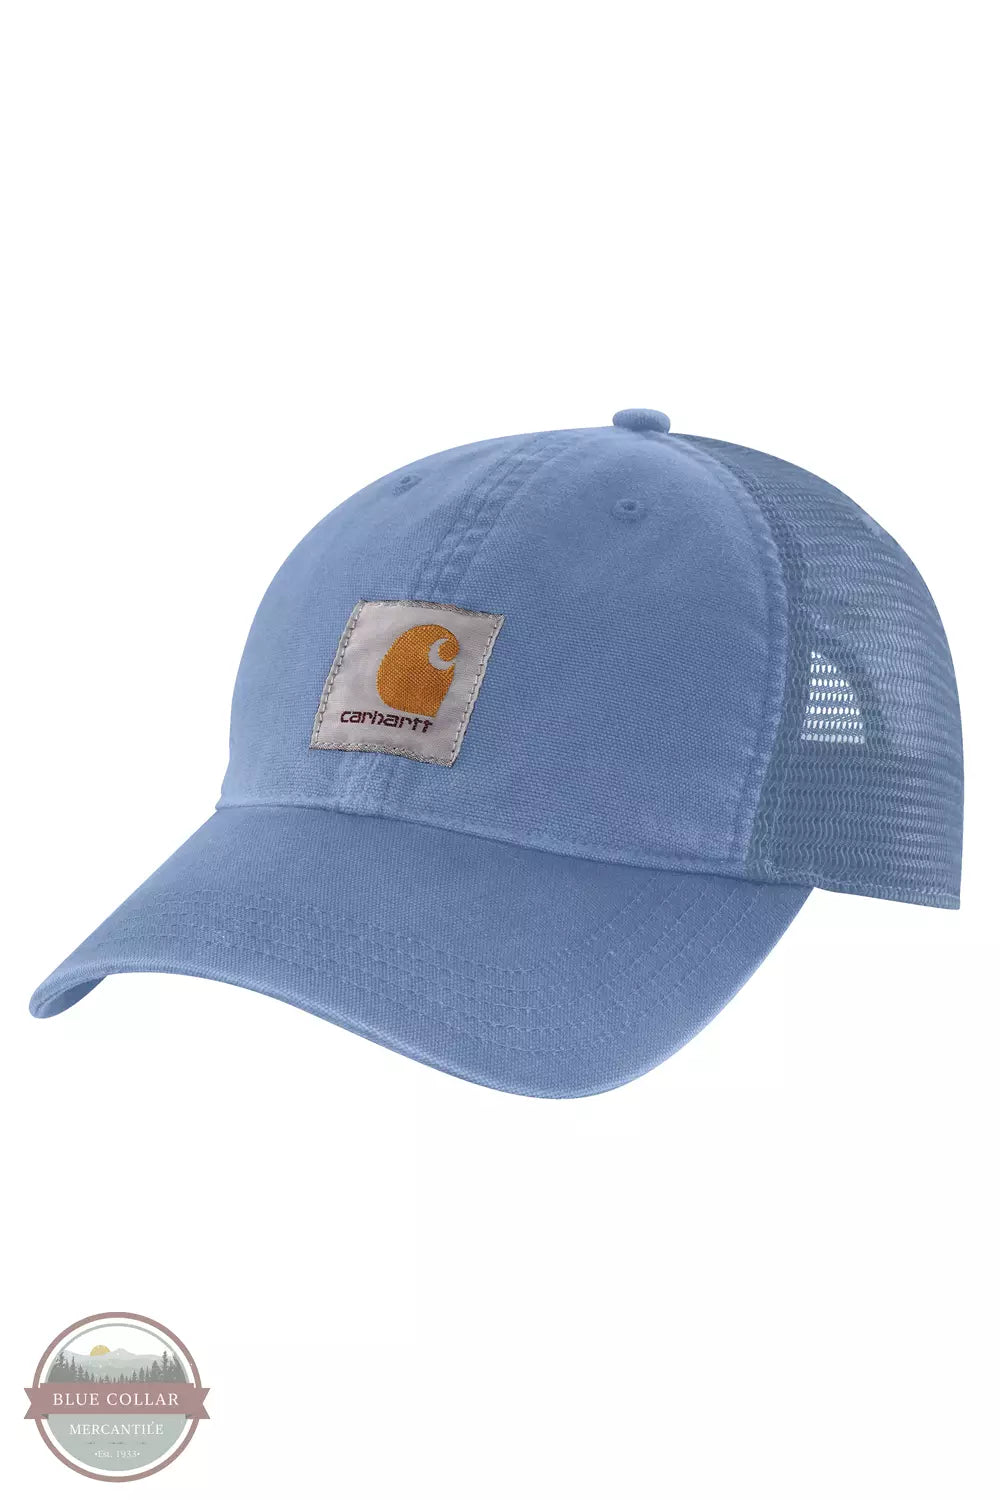 Carhartt 100286 Canvas Mesh Back Cap Skystone Front View